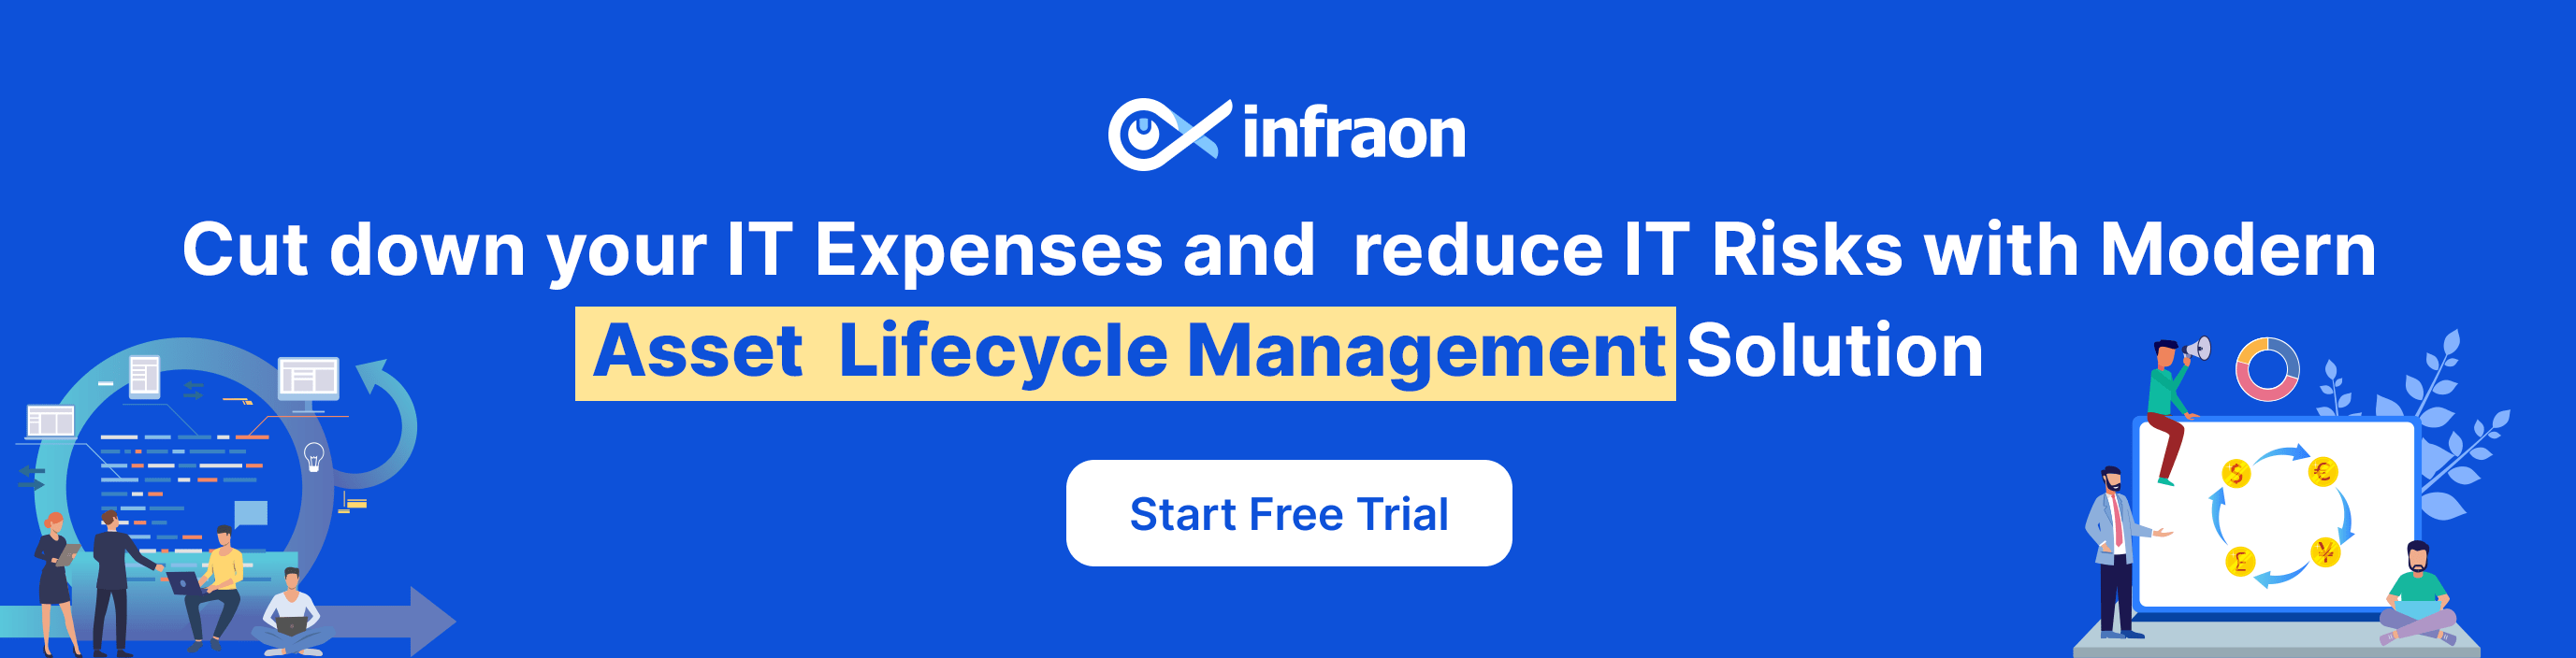 Infraon Assets Wide Banner 2, Asset Lifecycle Management